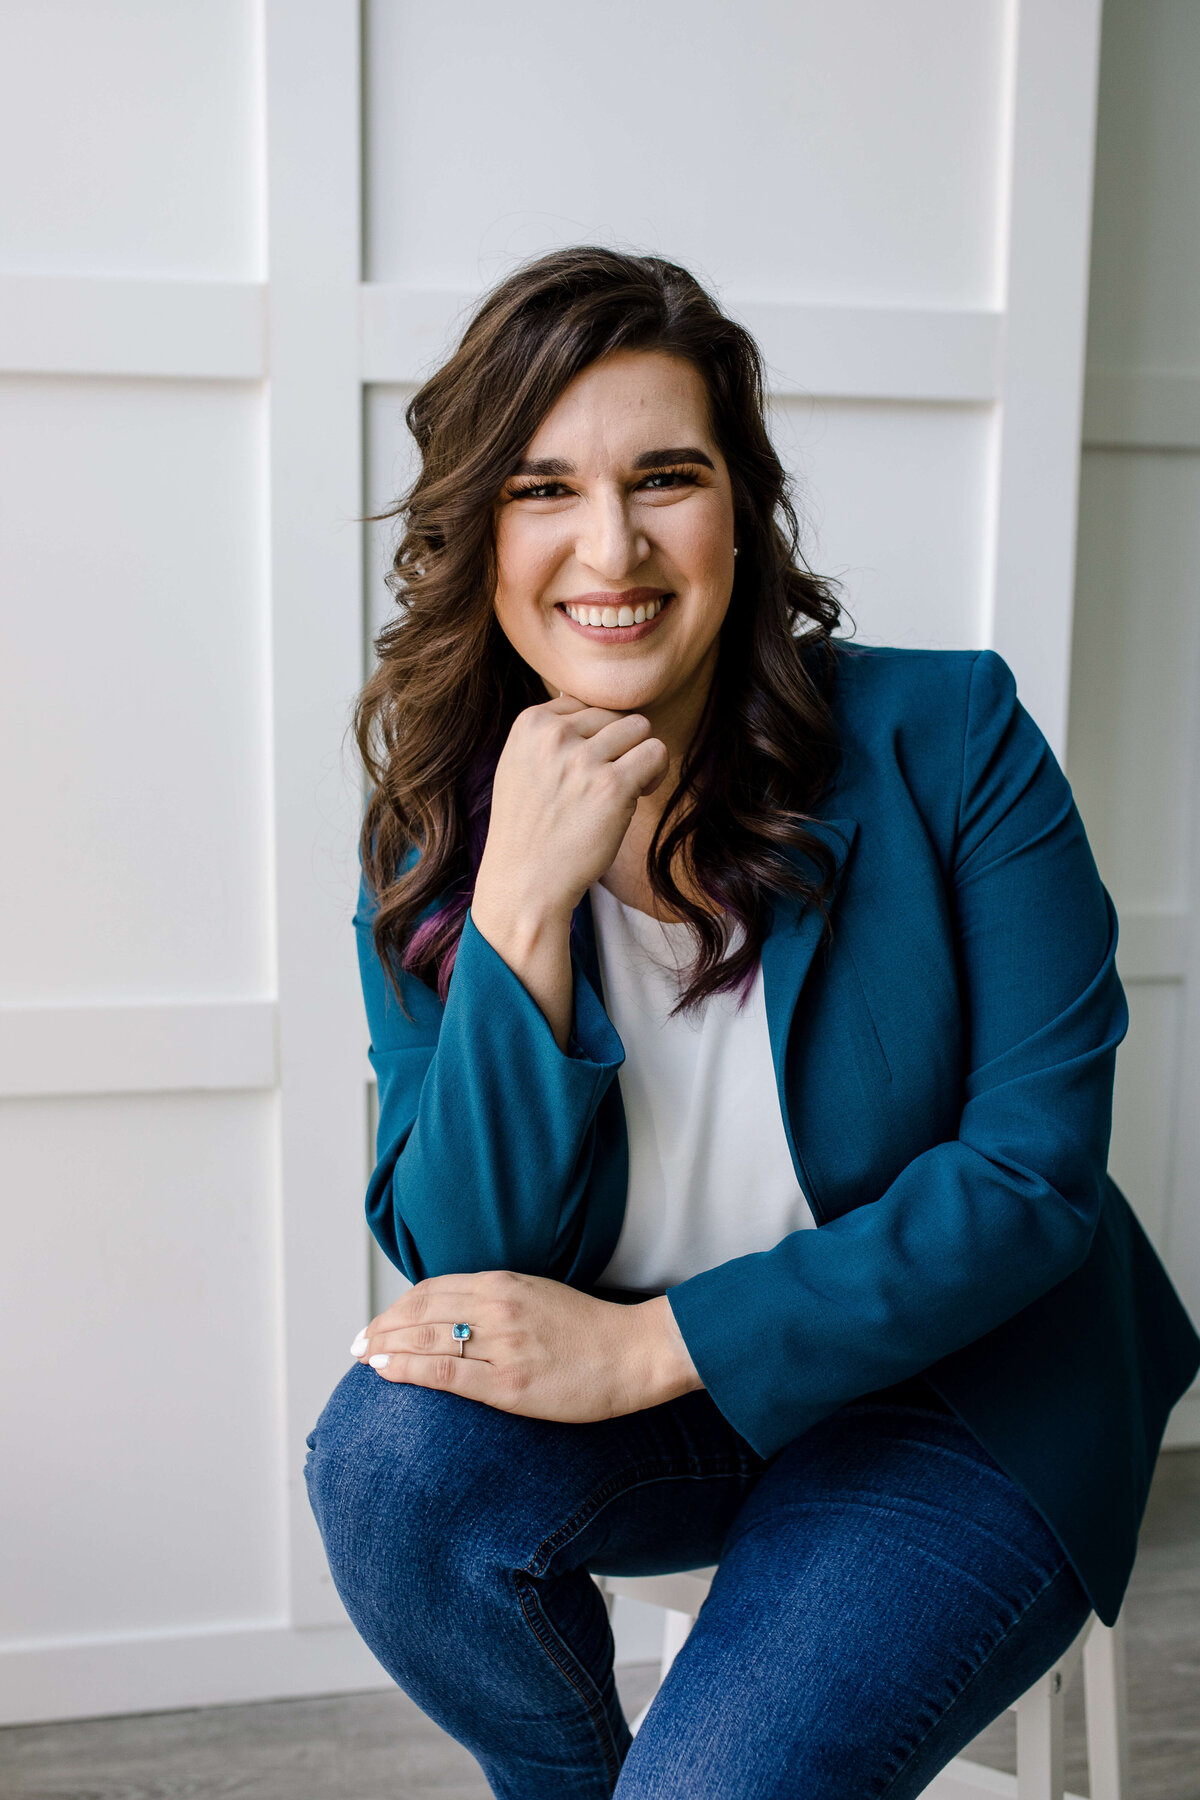 Headshot poses for business owners with woman and blue jeans and a tail blazer sitting on a stool in a studio brand photo shoot with her elbow resting on one of her niece and her other hand resting on her leg as she smiles